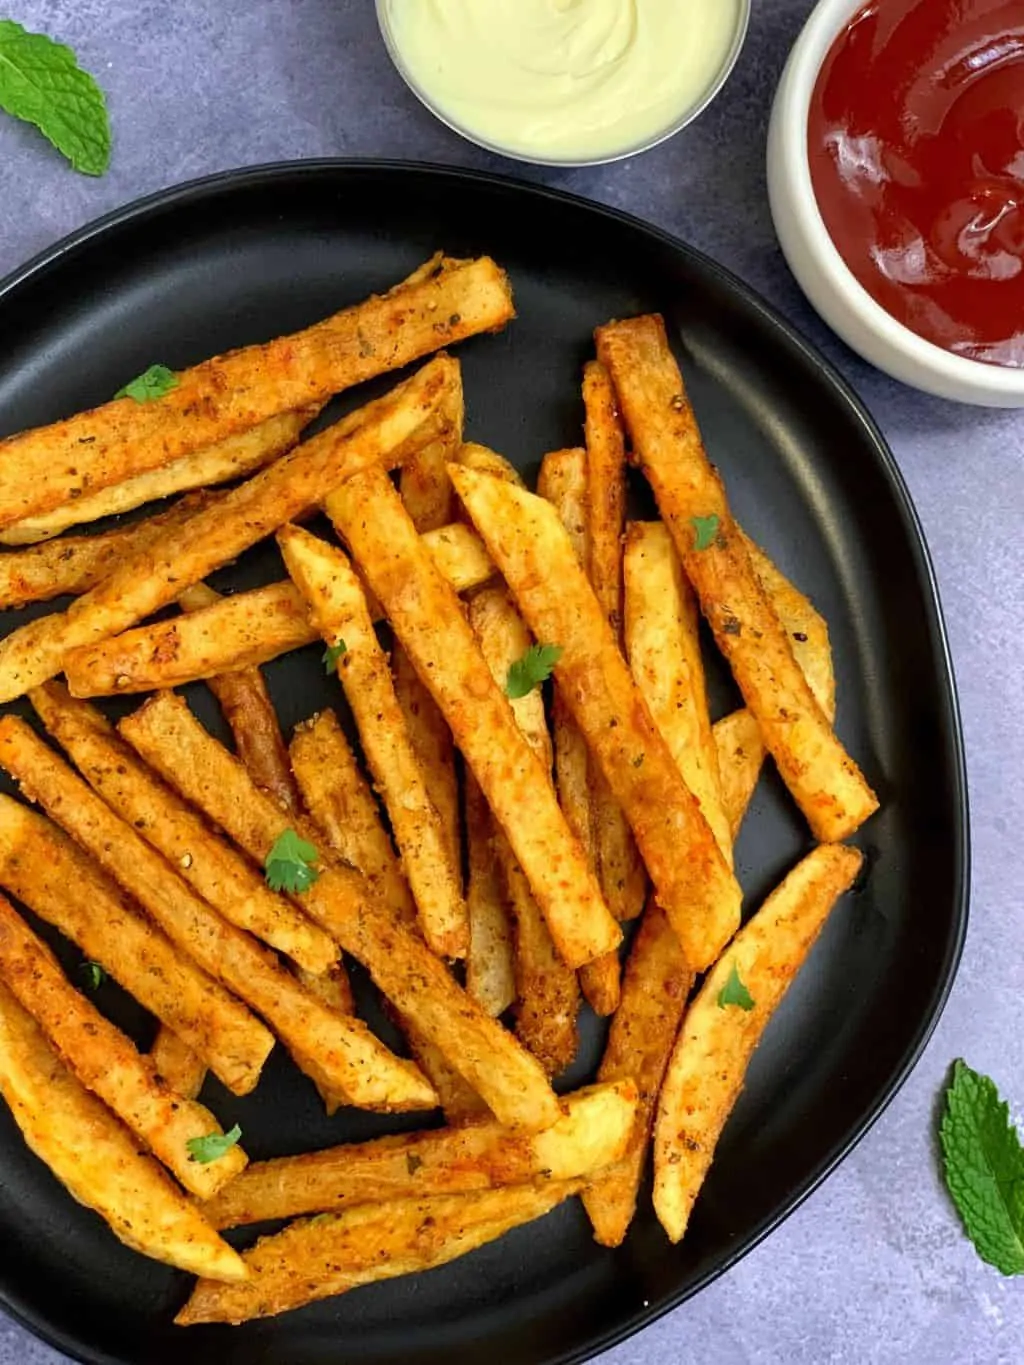 masala french fries served in a plate with tomato ketchup and mayonnaise on the side